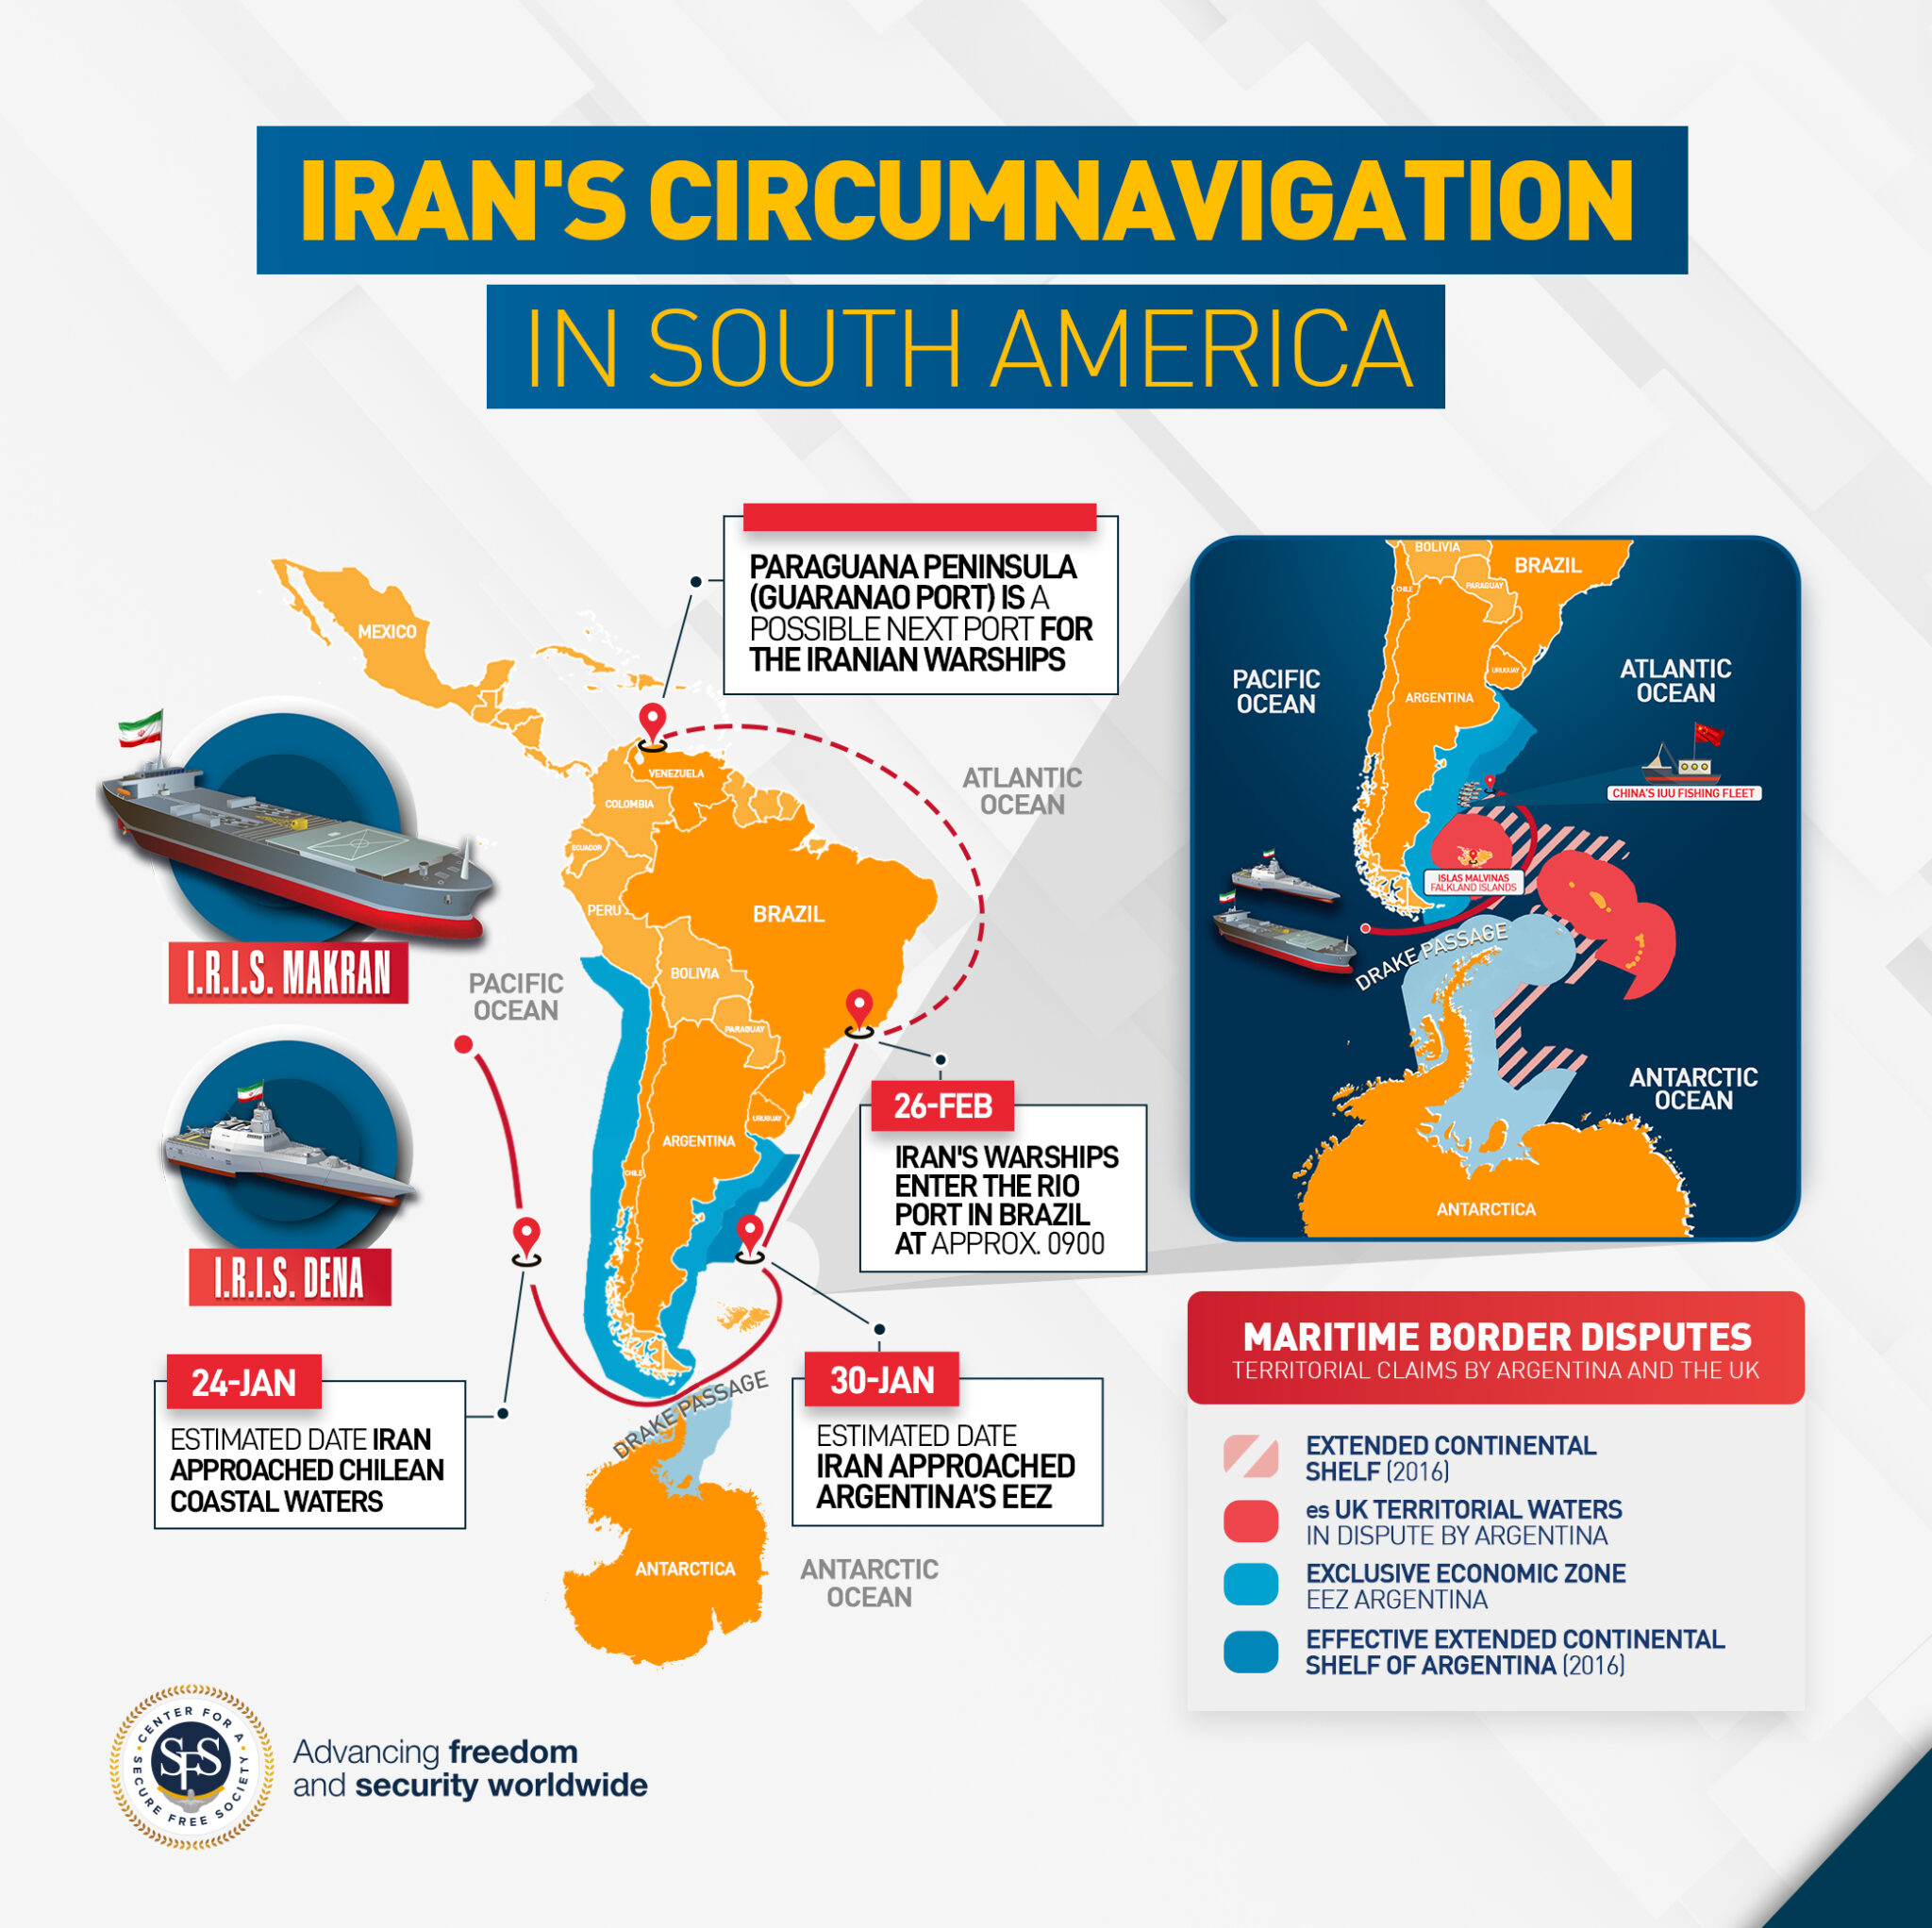 Iran ran into more obstacles as it entered the South Atlantic. The flotilla remained on “stand-by” as it approached Argentina’s Exclusive Economic Zone (EEZ), a convenient hiding place for the Iranian warships who apparently had to delay its arrival to Brazil. (Photo SFS)